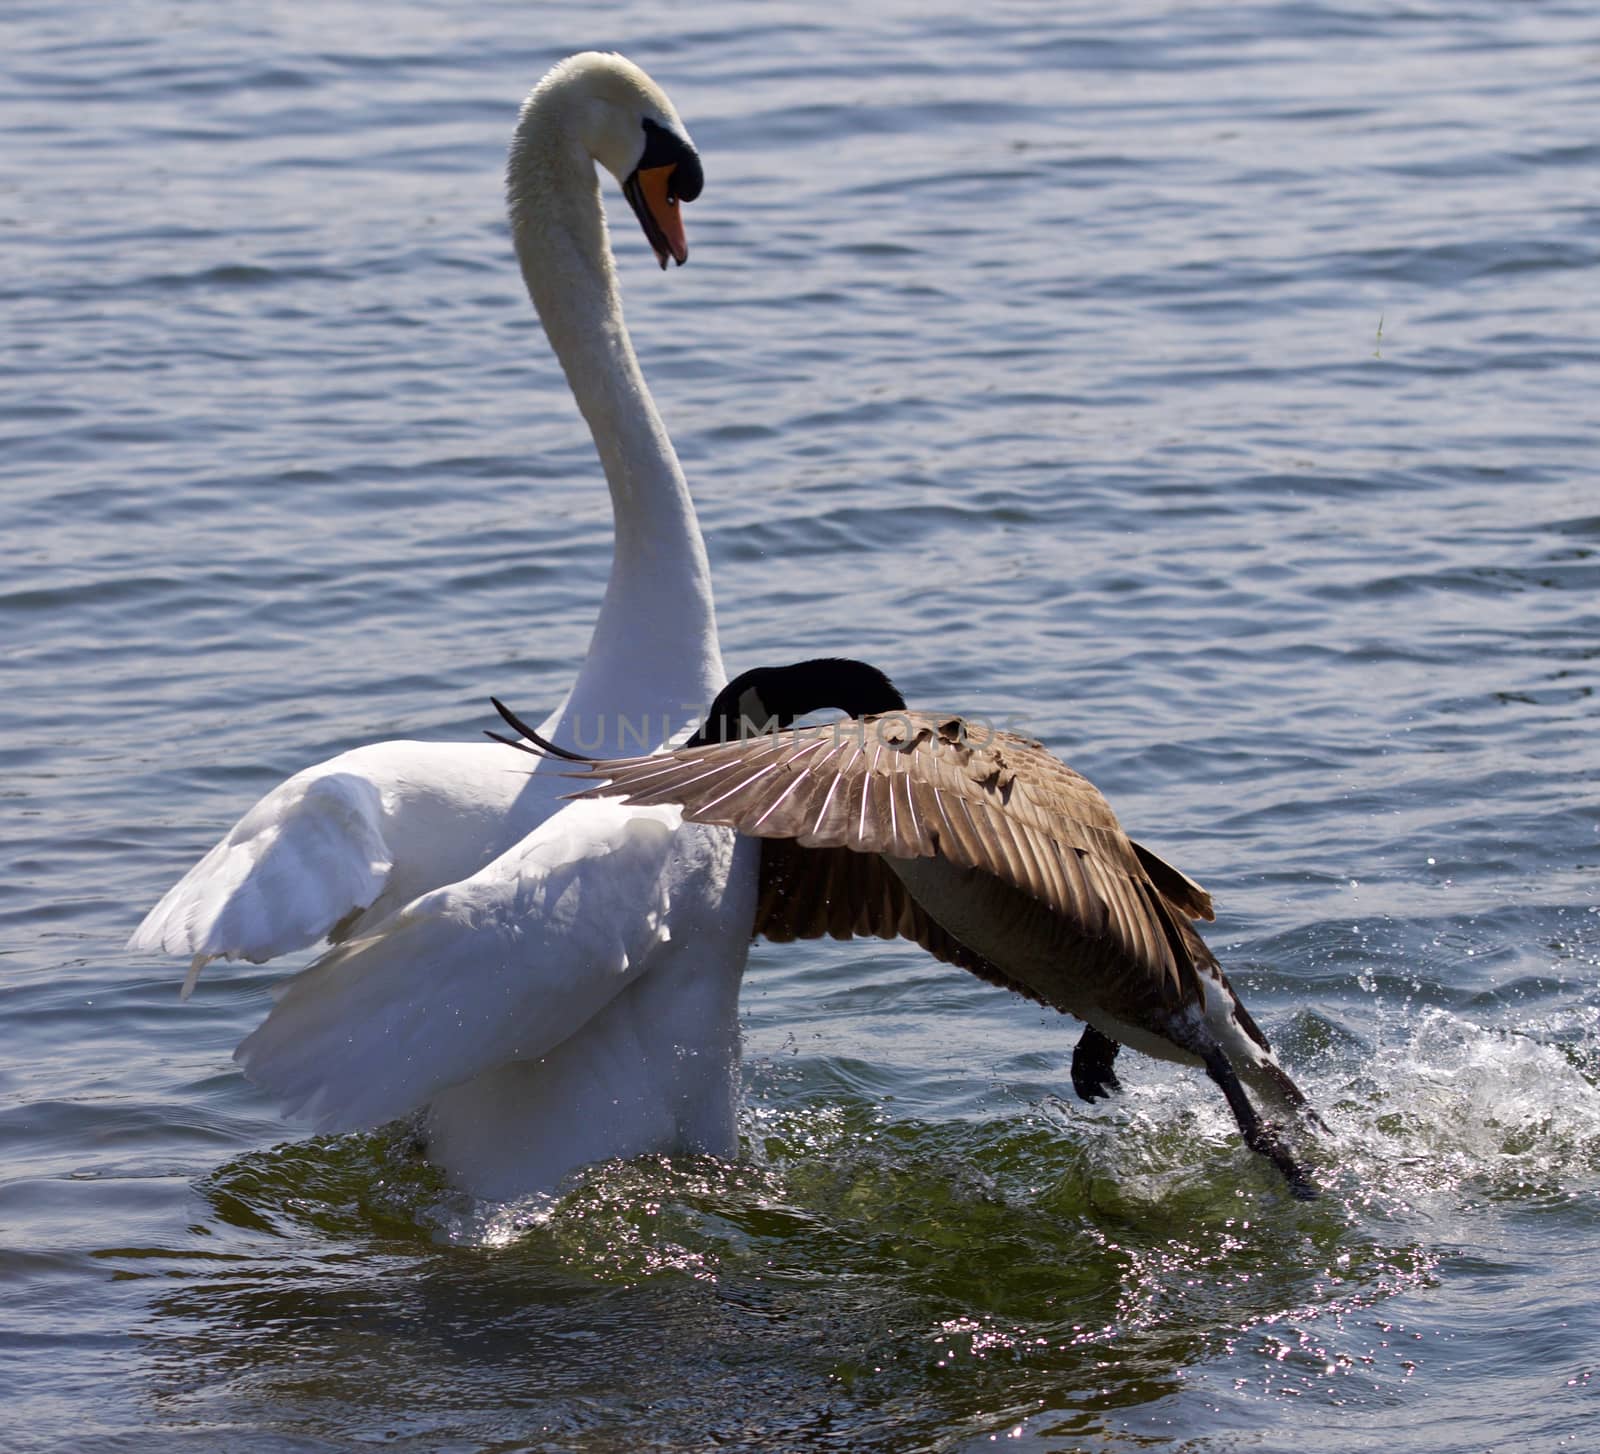 Amazing image of the epic fight between the Canada goose and the swan on the lake